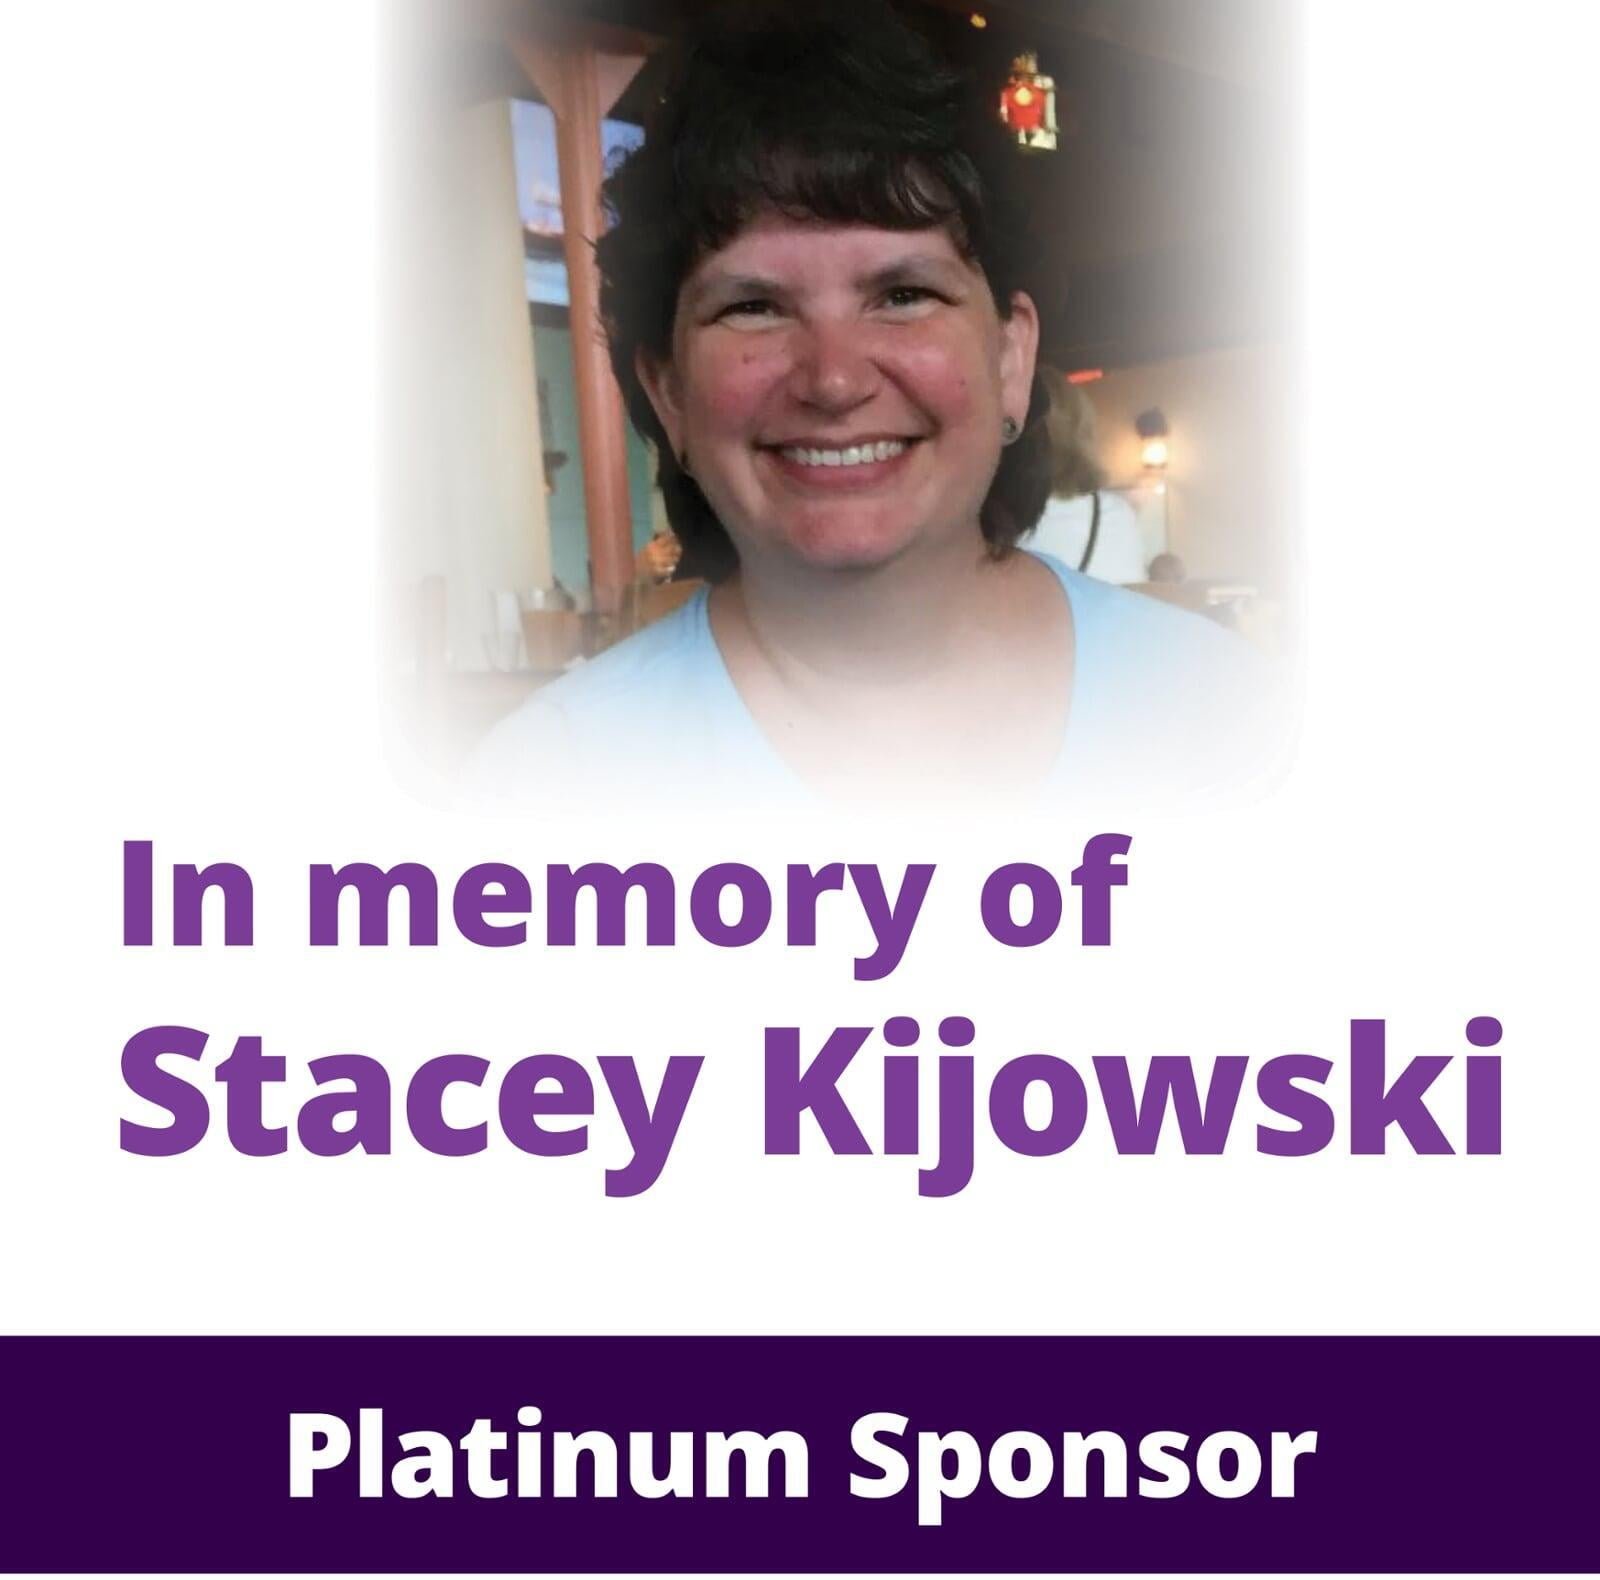 Photo of Stacey Kijowski with text reading In memory of Stacey Kijowski